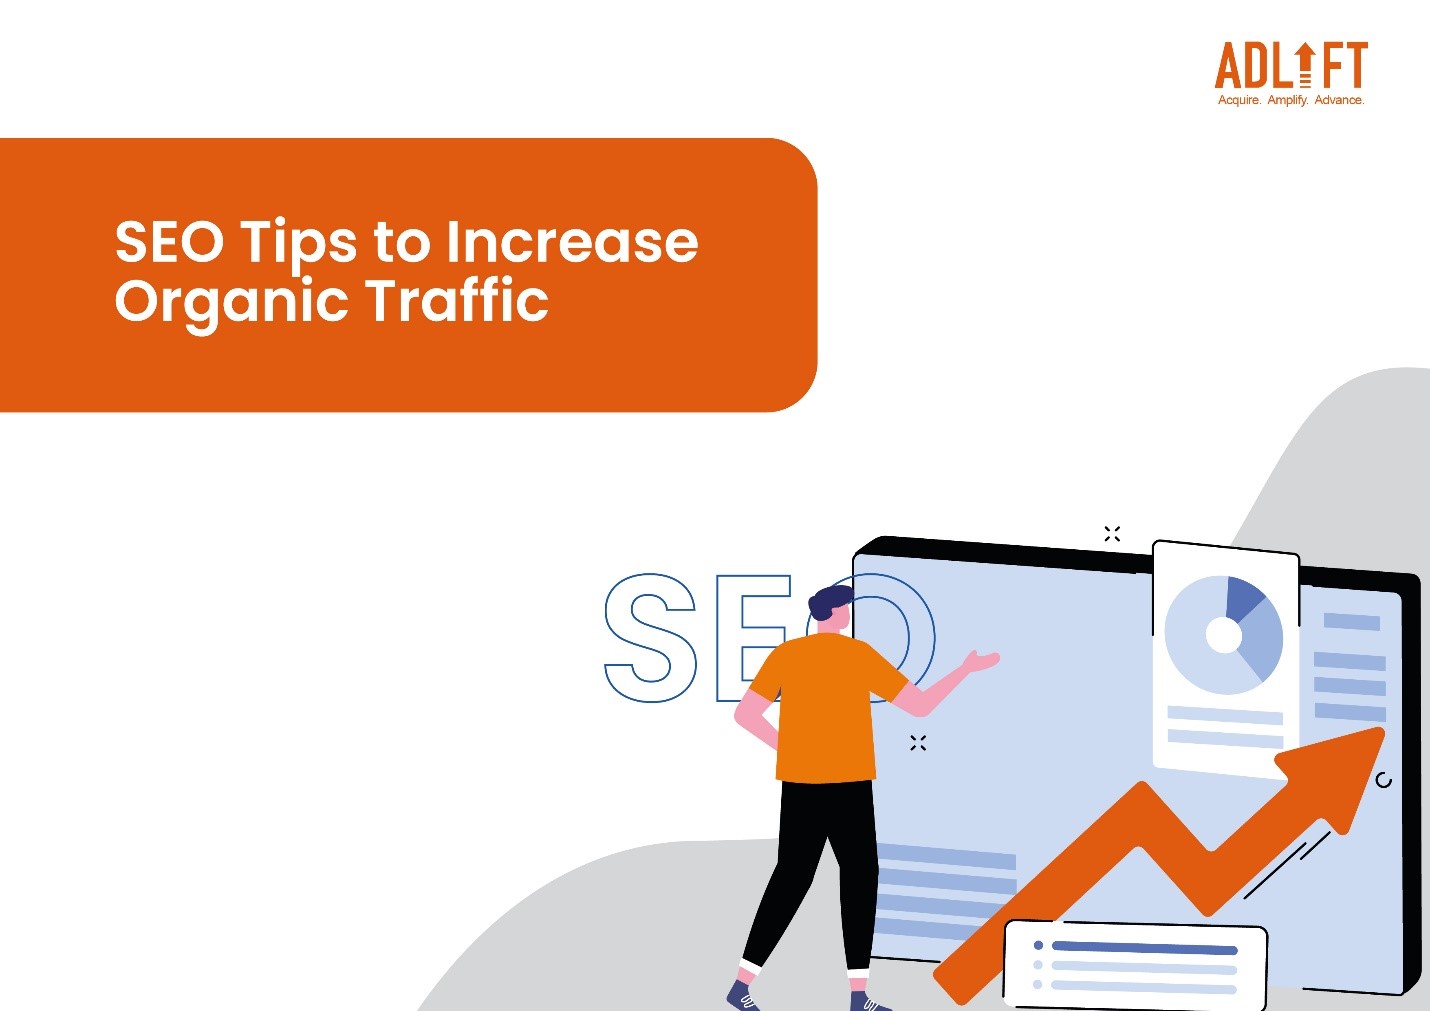 The Go-To SEO Tips to Increase Organic Traffic